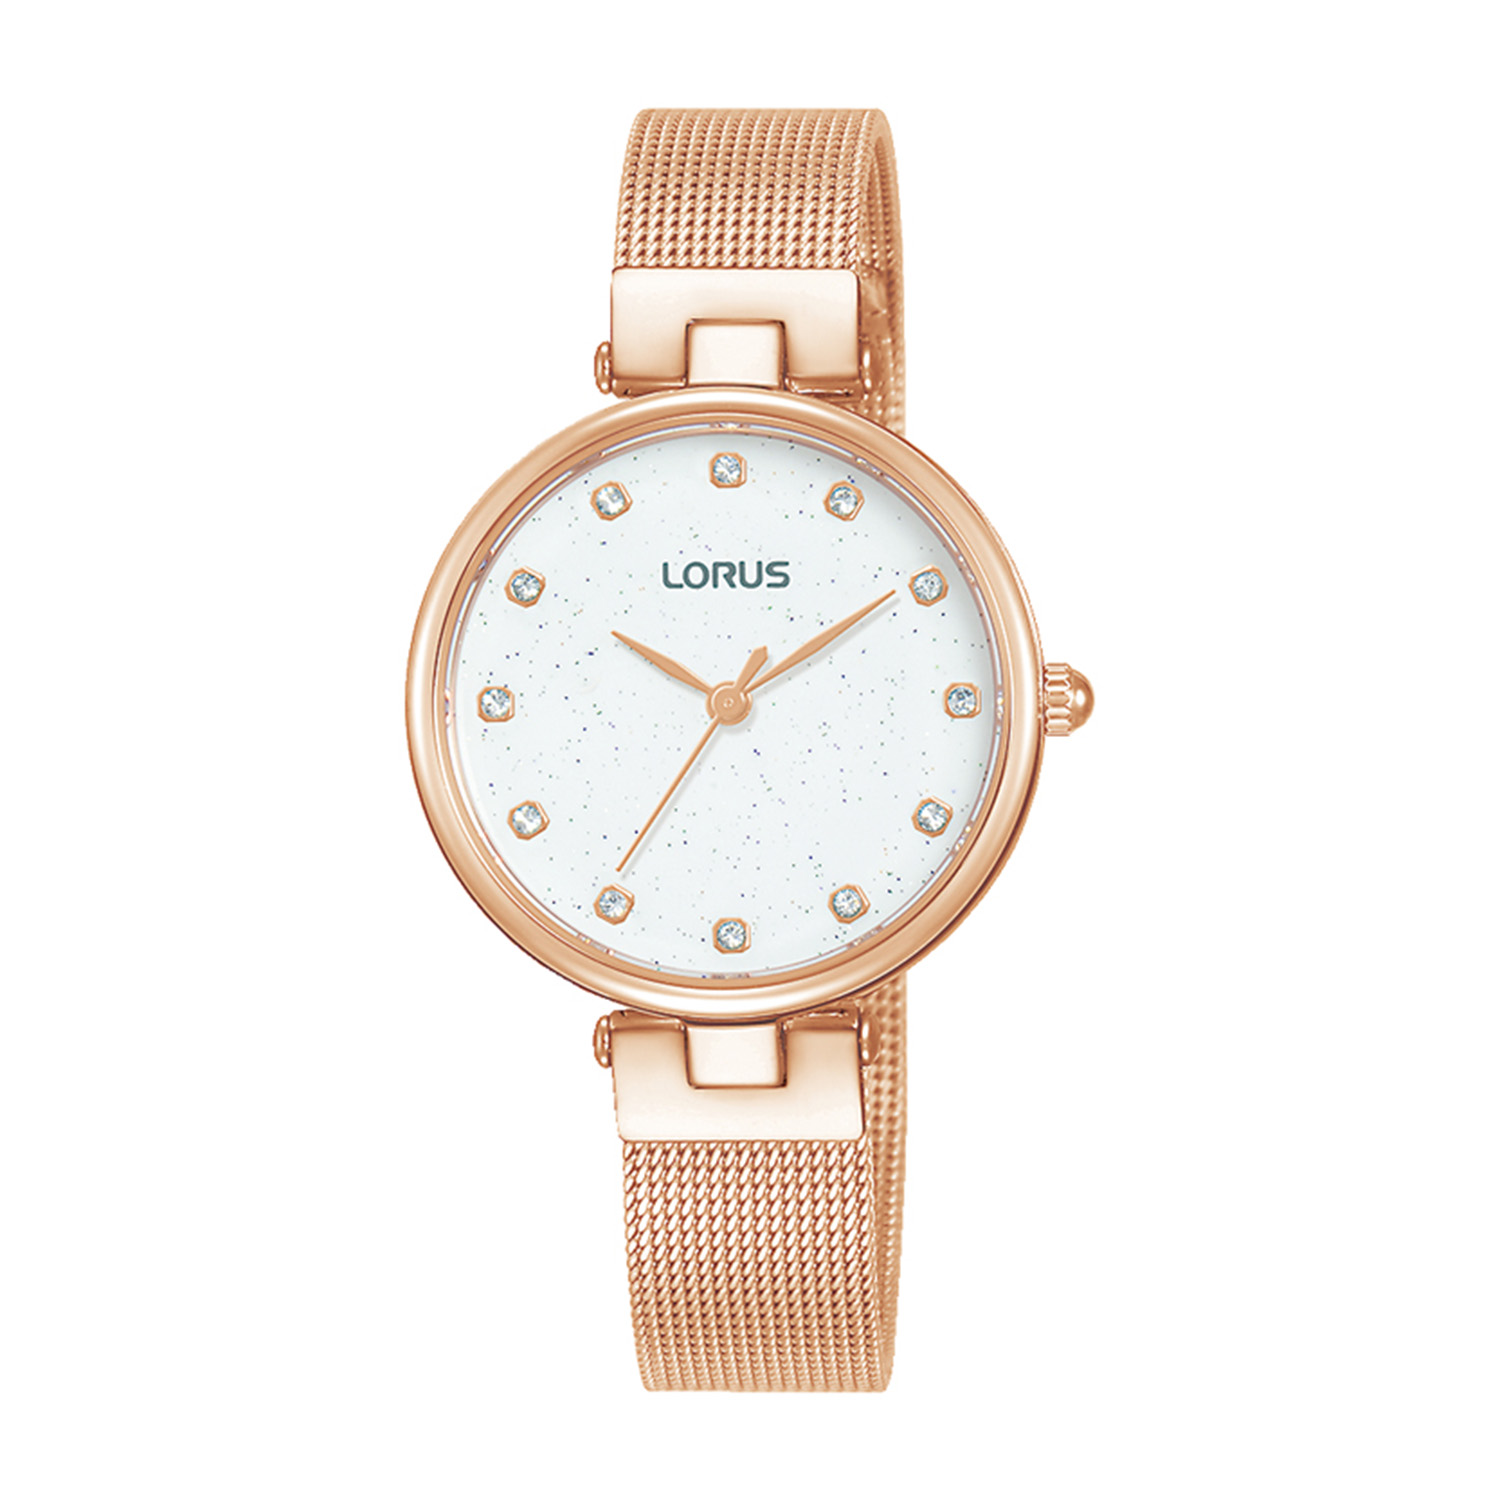 Womens LORUS pink stainless steel watch with white dial and bracelet.